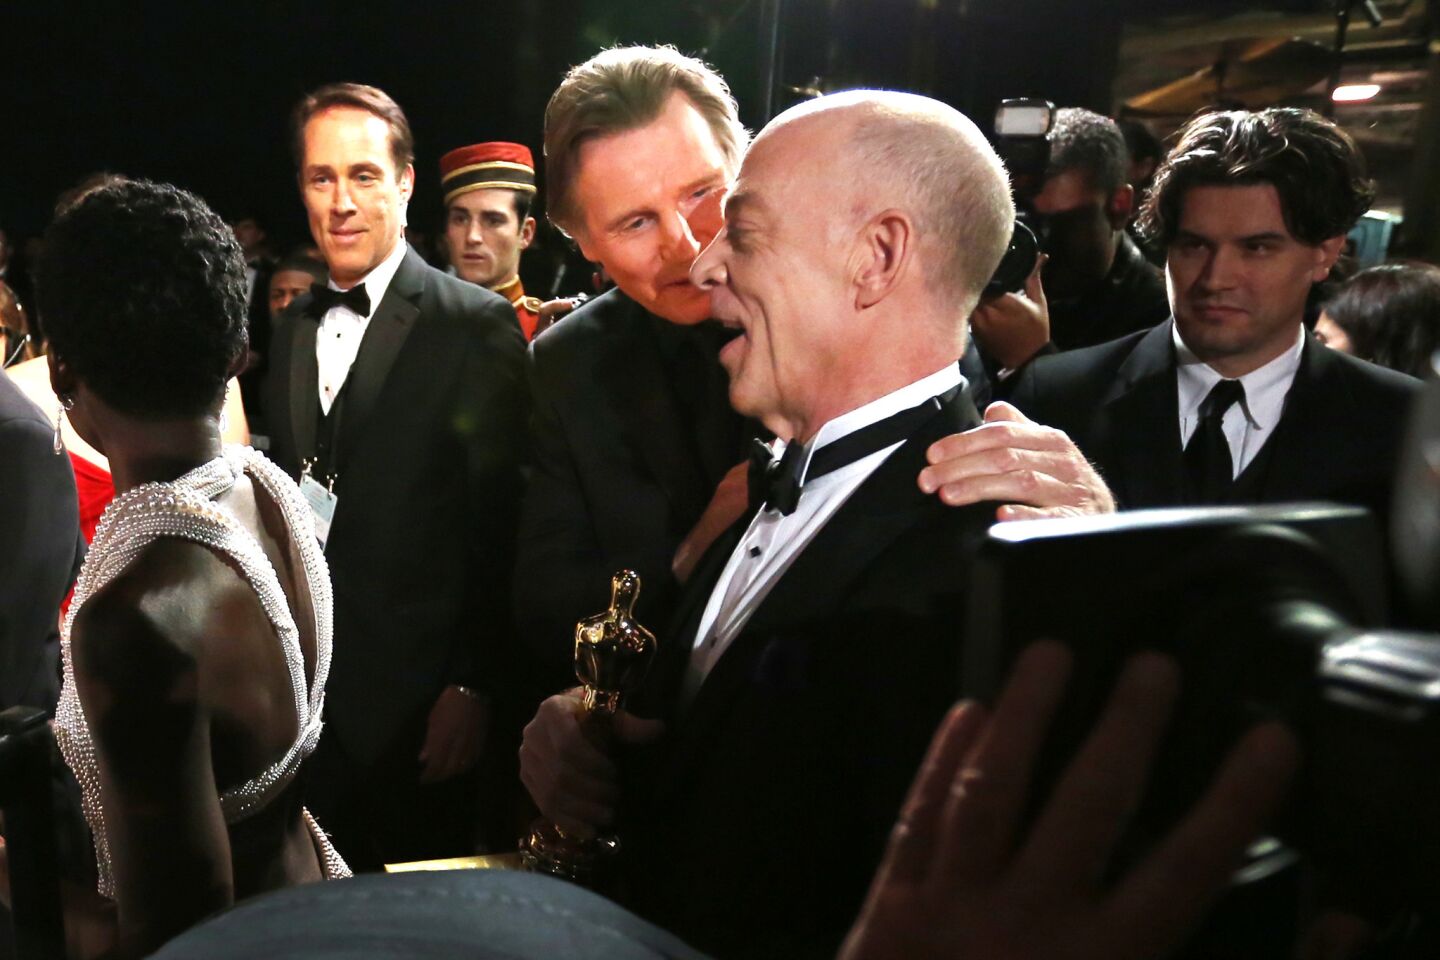 Actors Liam Neeson and J.K. Simmons, right, chat backstage at the 87th Academy Awards after Simmons won a supporting actor prize for "Whiplash" in 2015.